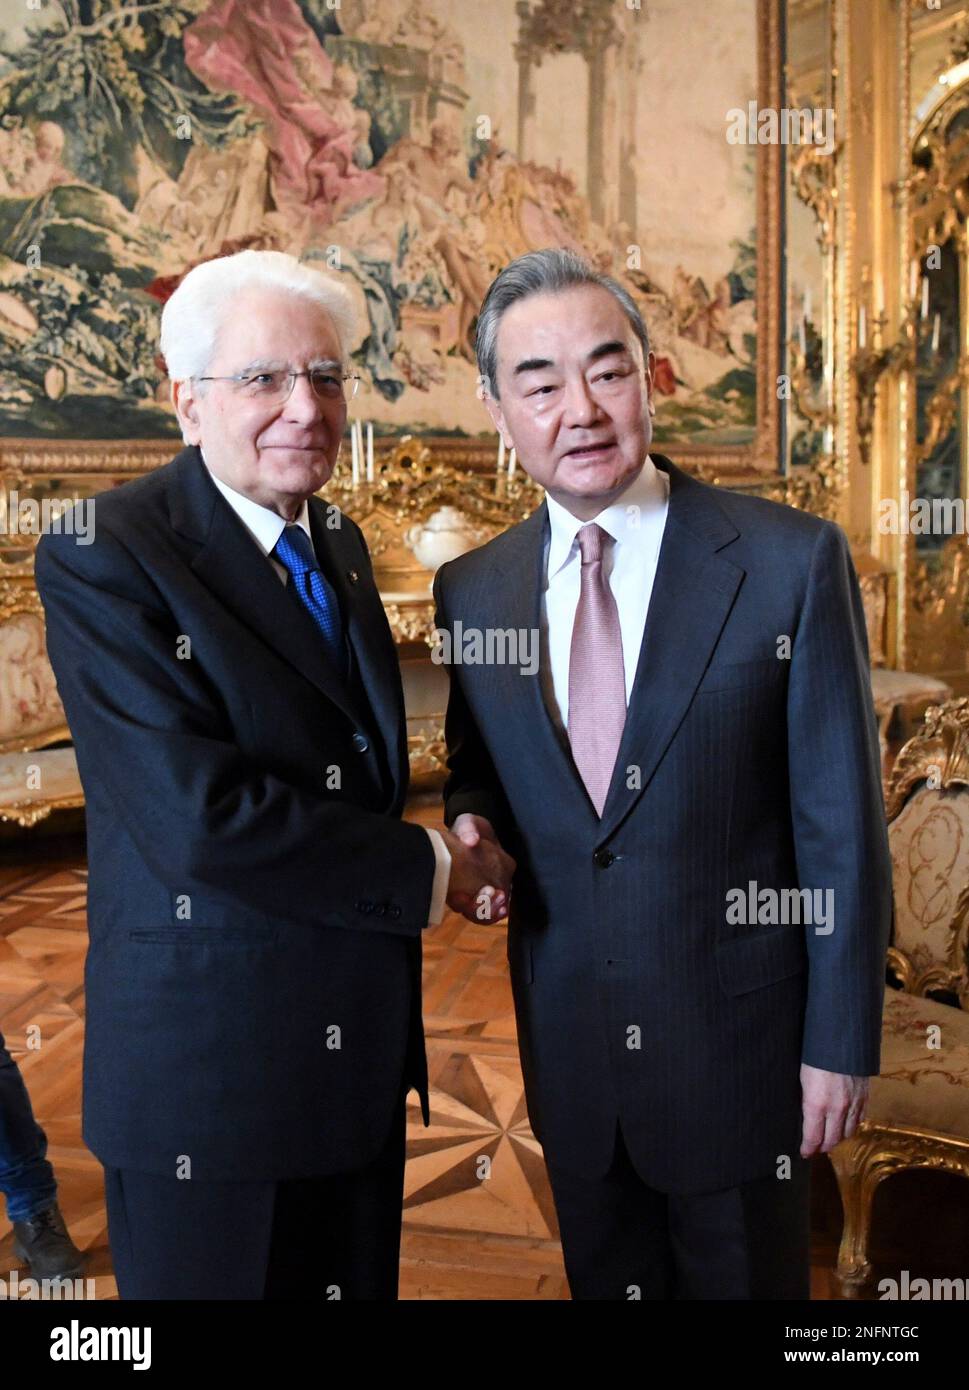 Rome, Italy. 17th Feb, 2023. Italian President Sergio Mattarella meets with Wang Yi (R), a member of the Political Bureau of the Communist Party of China (CPC) Central Committee and director of the Office of the Foreign Affairs Commission of the CPC Central Committee, in Rome, Italy, Feb. 17, 2023. Credit: Jin Mamengni/Xinhua/Alamy Live News Stock Photo